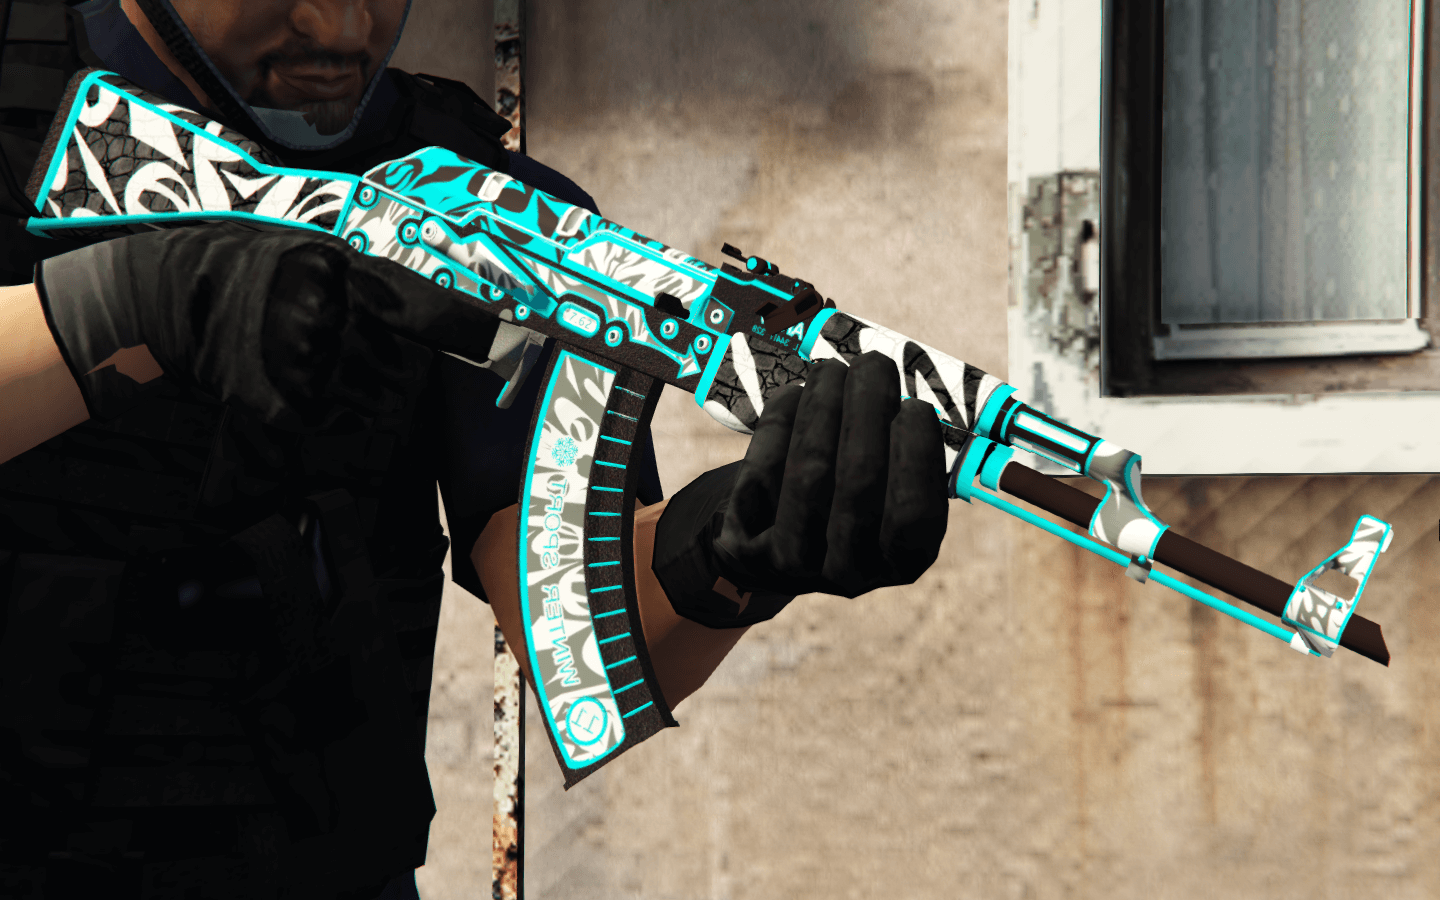 download the last version for iphoneFAMAS Colony cs go skin